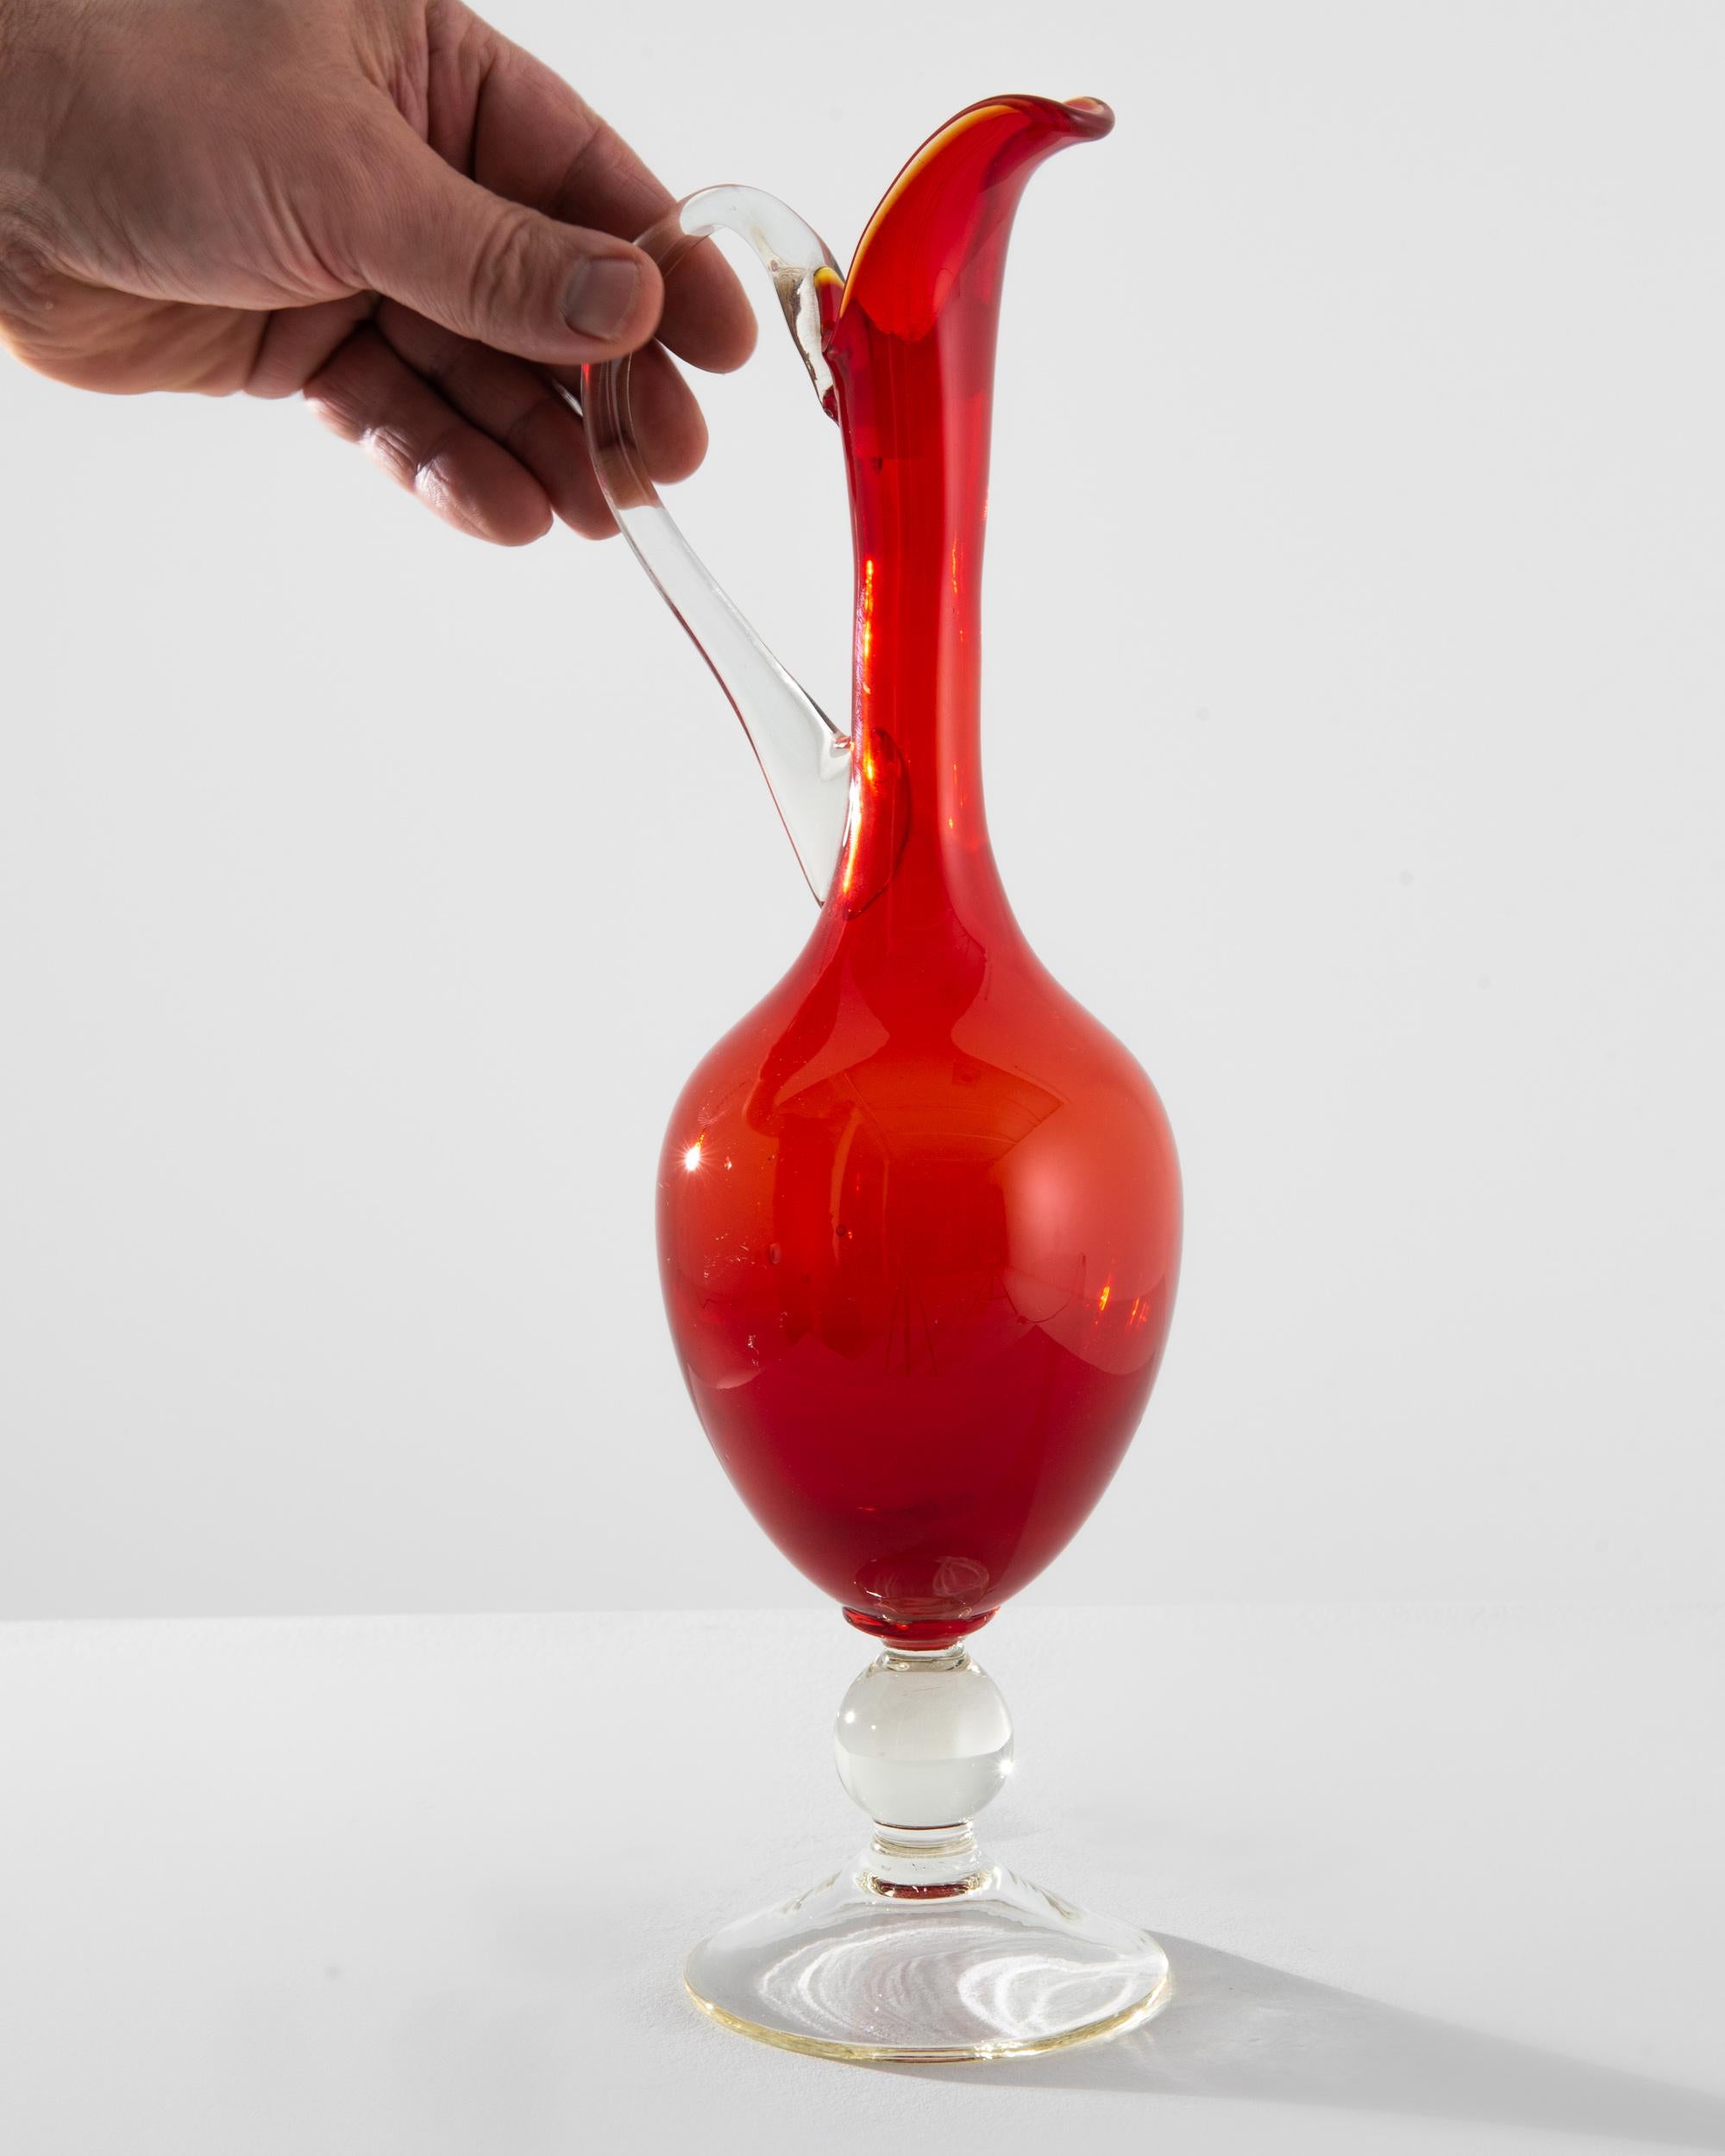 Introducing the quintessence of Italian elegance from the 1960s, this exquisite red glass jug is a testament to timeless design and artisanal craftsmanship. With its vibrant ruby hue that captures the light, creating a warm, inviting glow, this jug